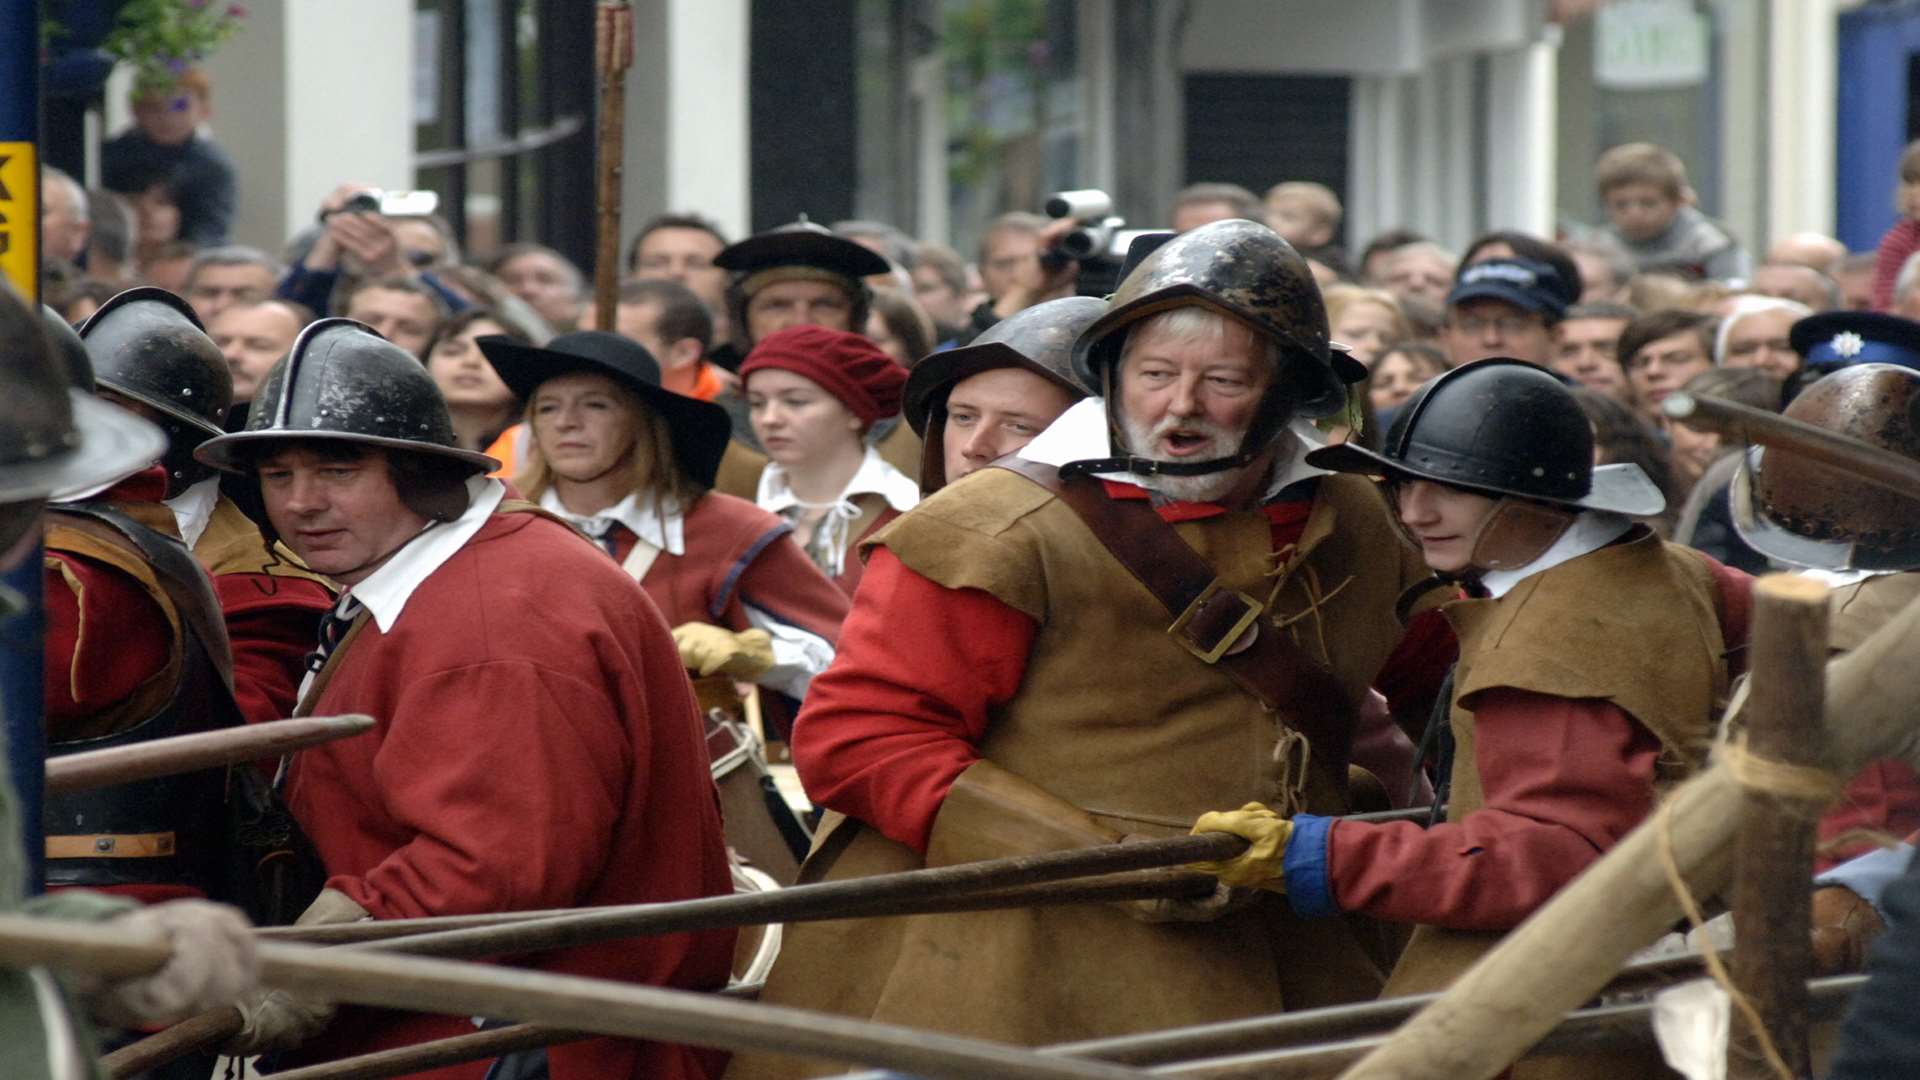 The Parliamentarians break through the Royalists barricade at the top of Gabriels Hill during the re-enactment of the Battle of Maidstone in 2008. Picture John Wardley